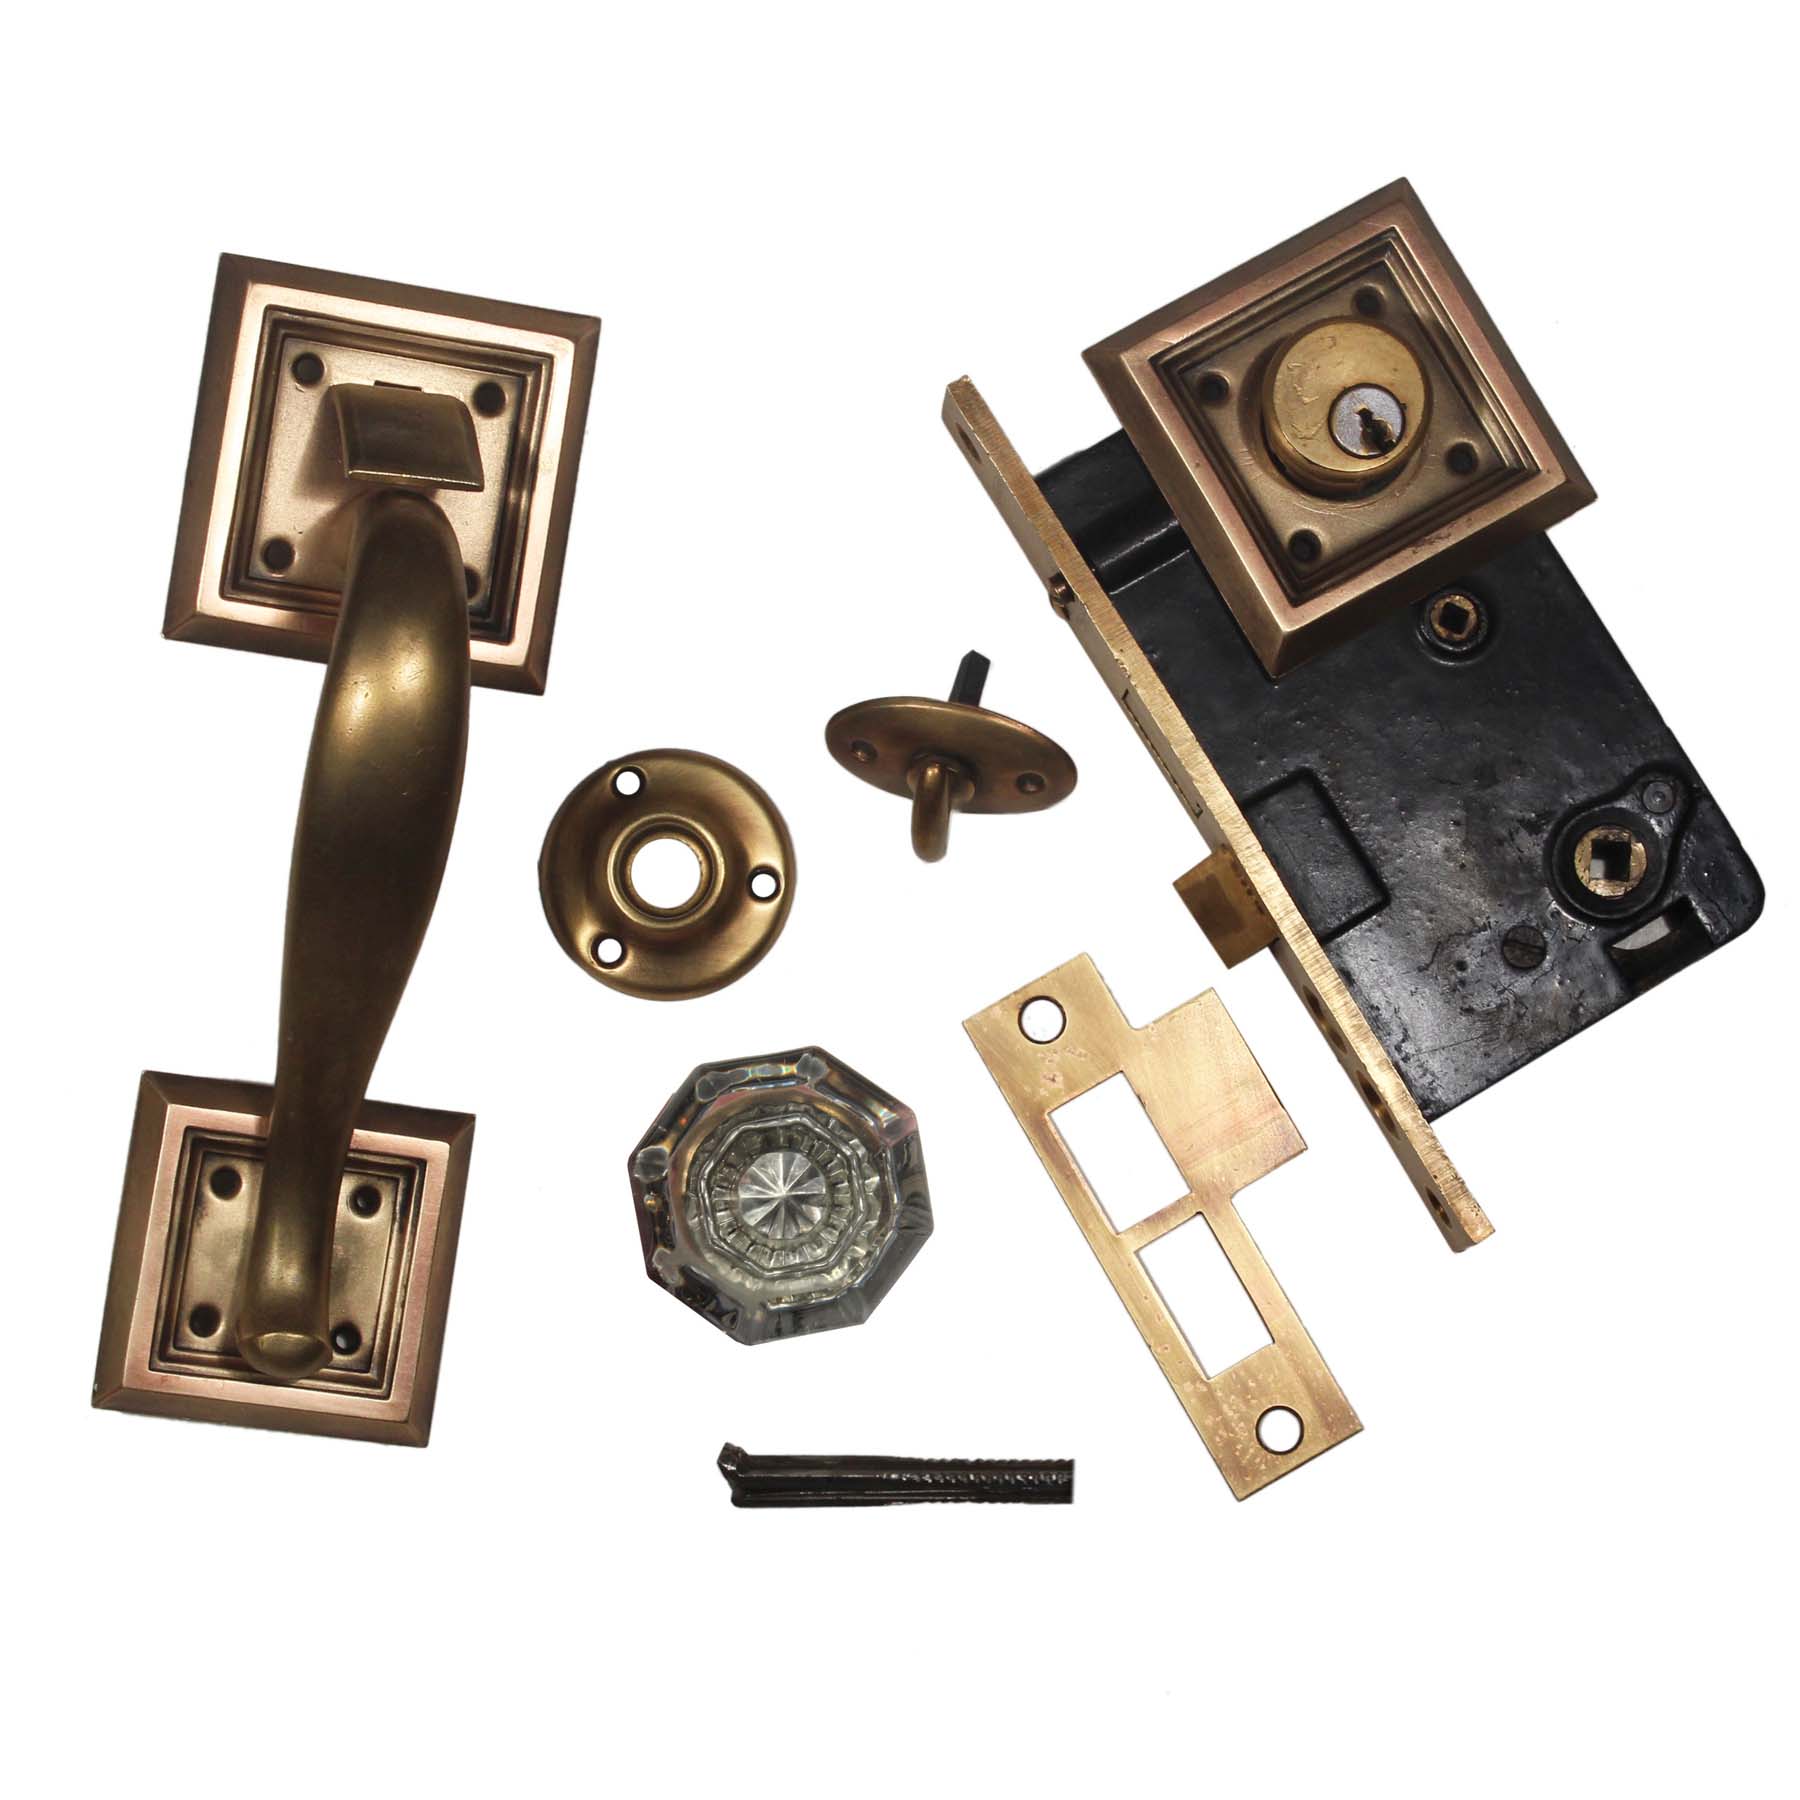 SOLD Complete Antique Brass Exterior Lock Set with Thumb Latch-0